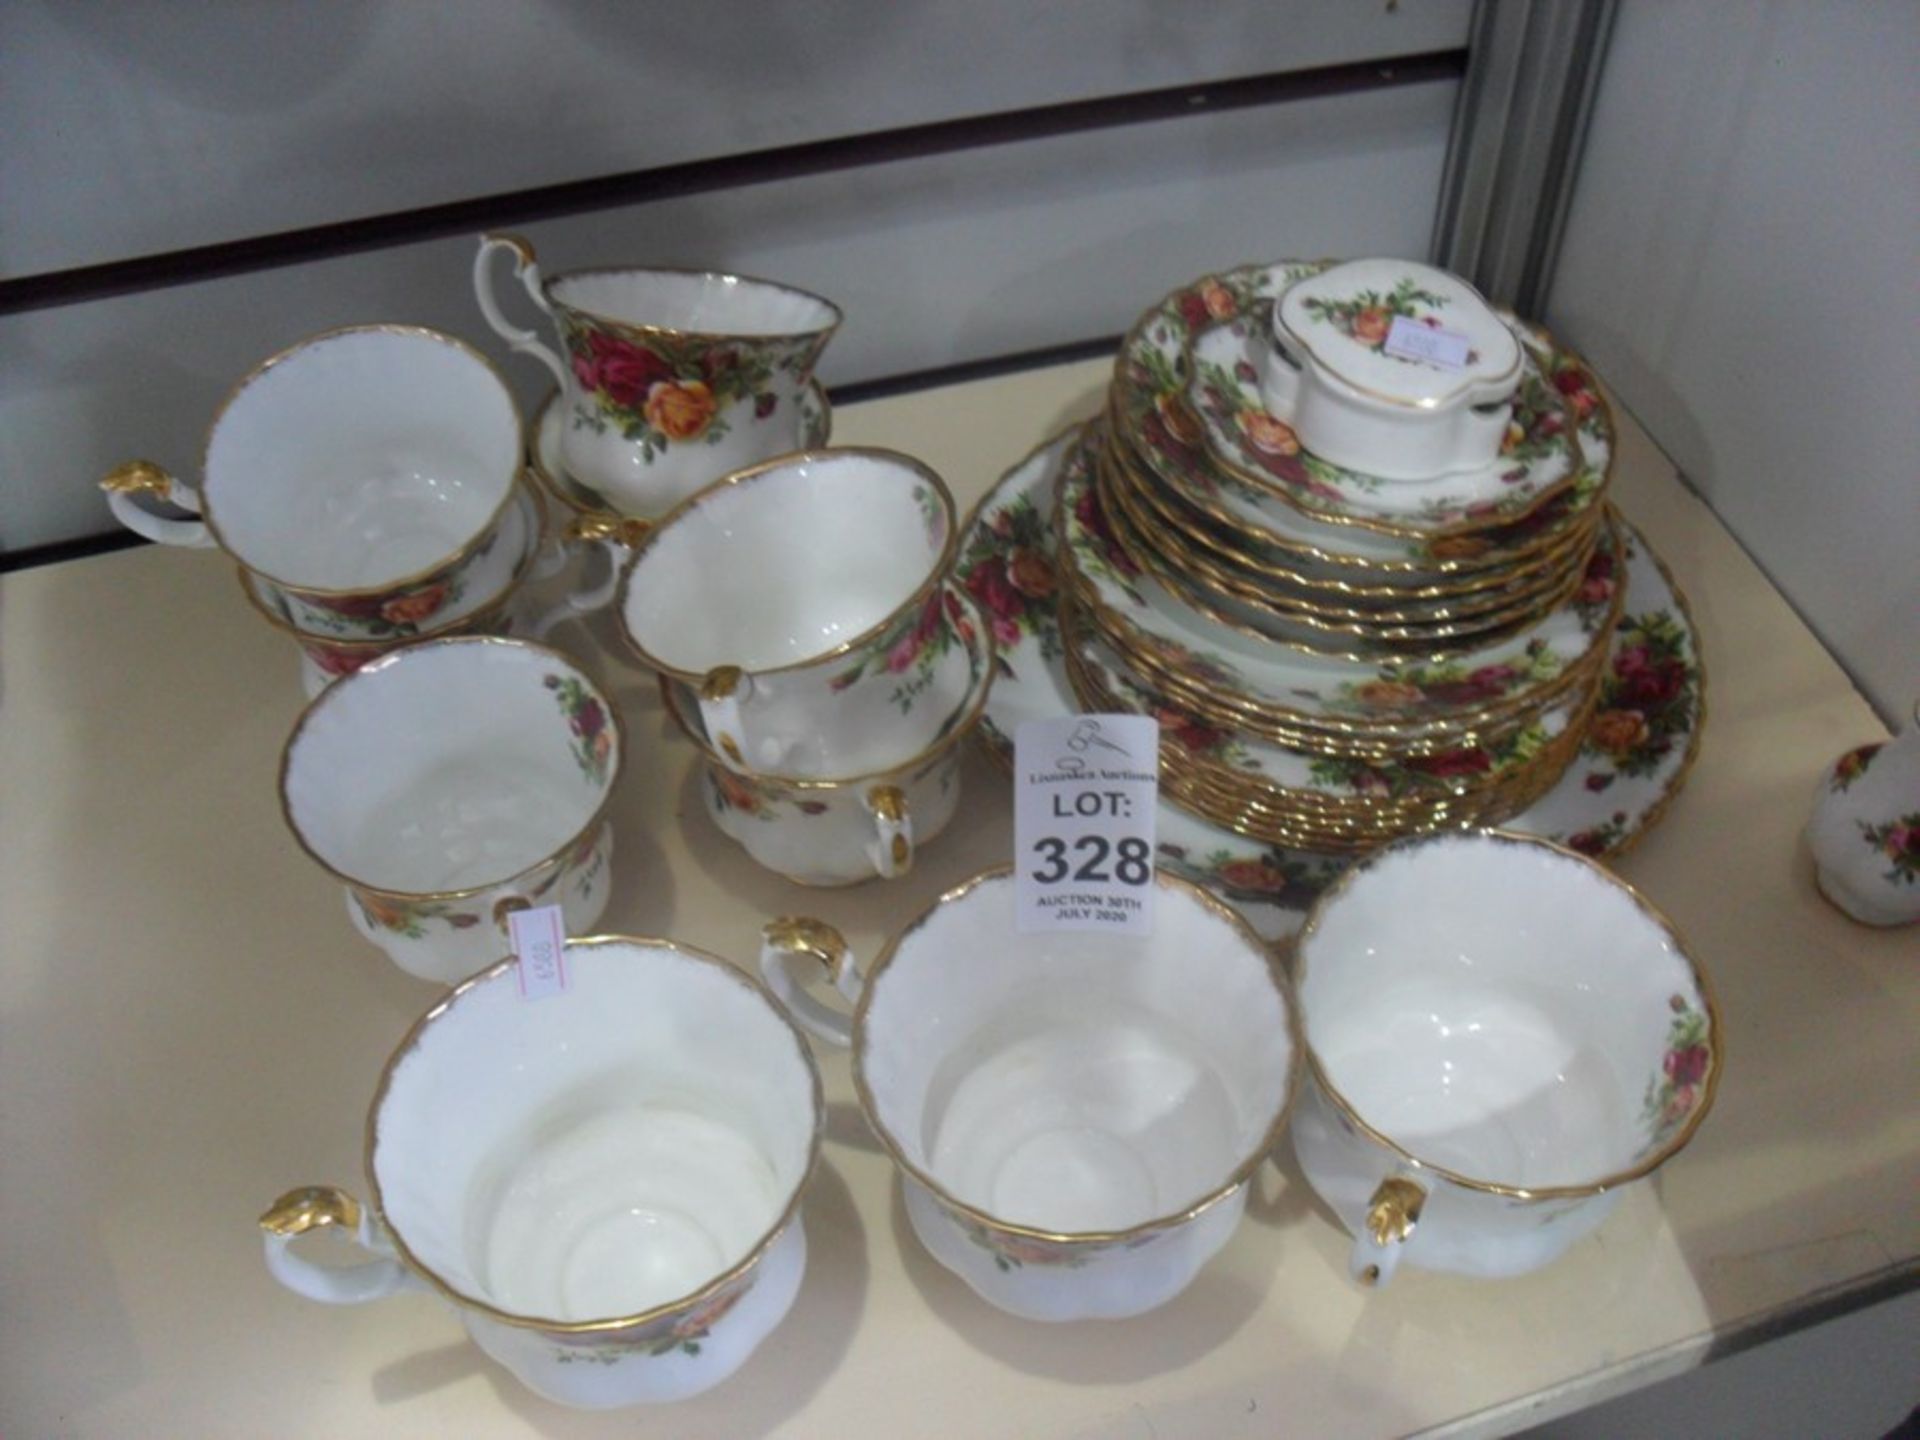 28 PIECES OF ROYAL ALBERT OLD COUNTRY ROSE TEA/DINNER SERVICE